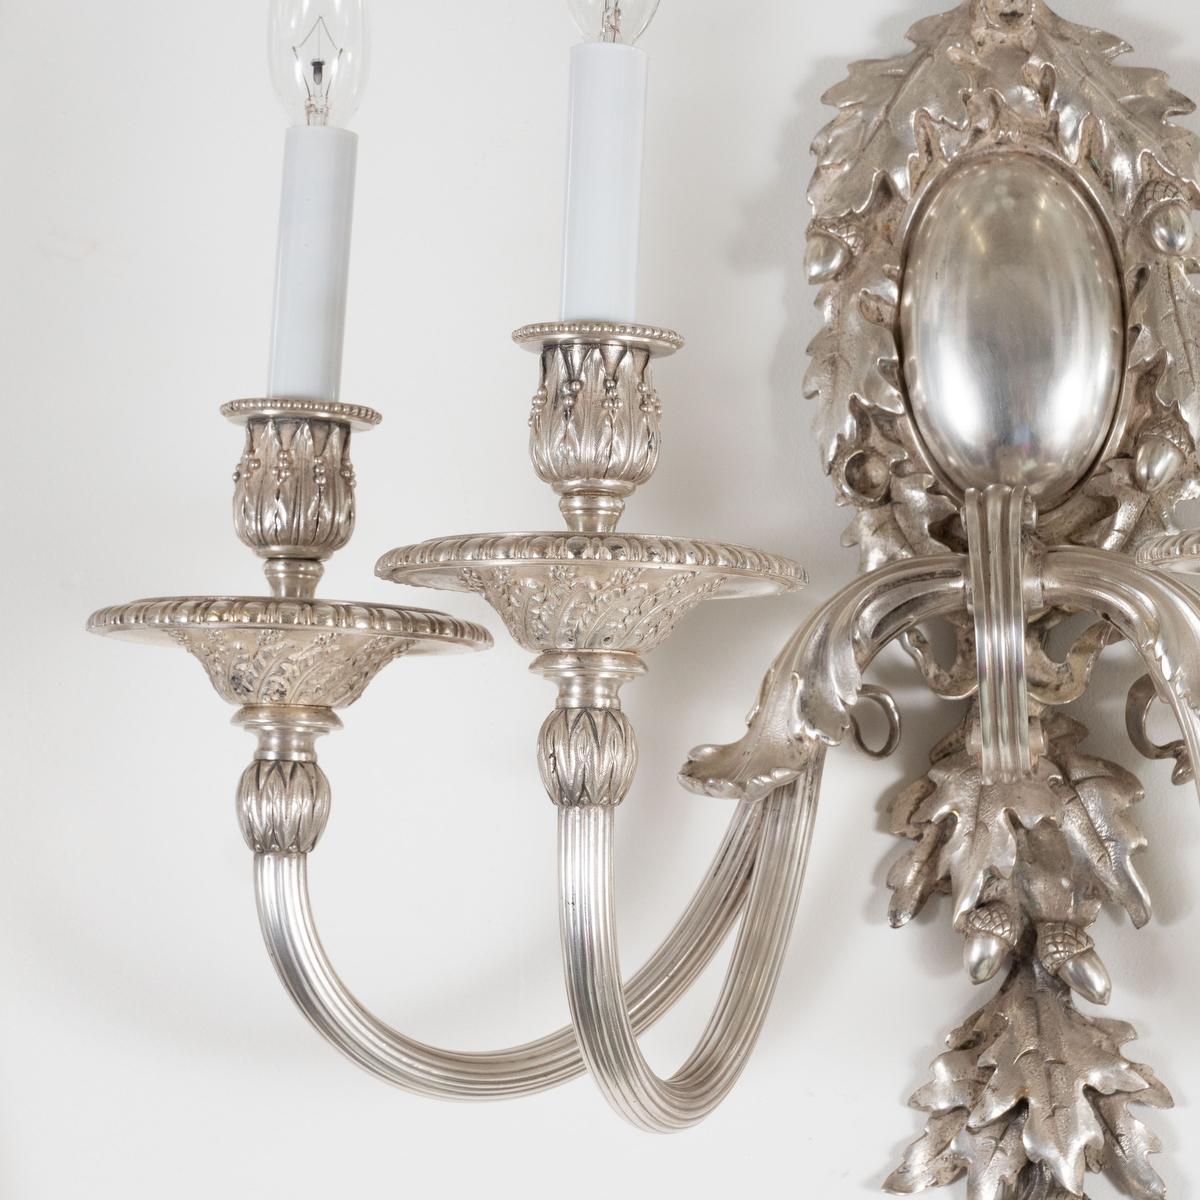 Mid-20th Century Pair of Large Silvered Bronze Candelabra Style Sconces For Sale